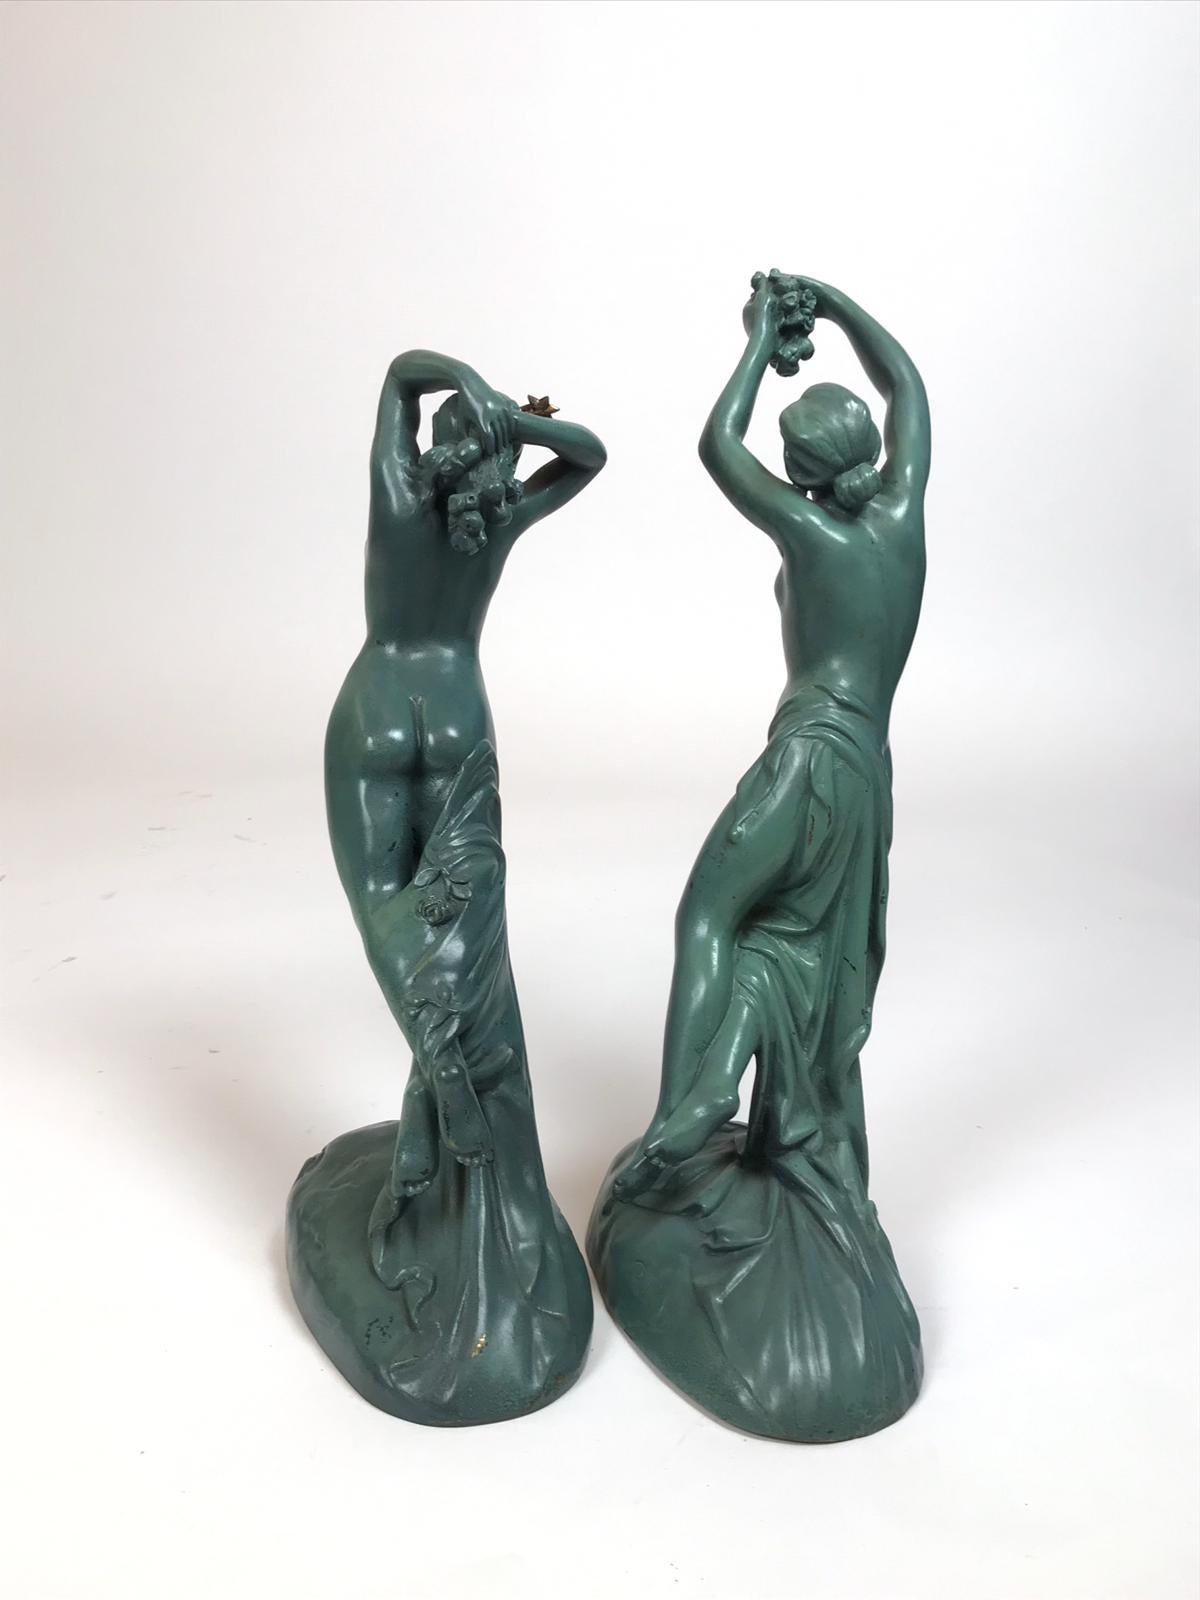 2 wonderful painted bronze with green patina female figures by the artist Joseph Michel-Ange Pollet. titled 